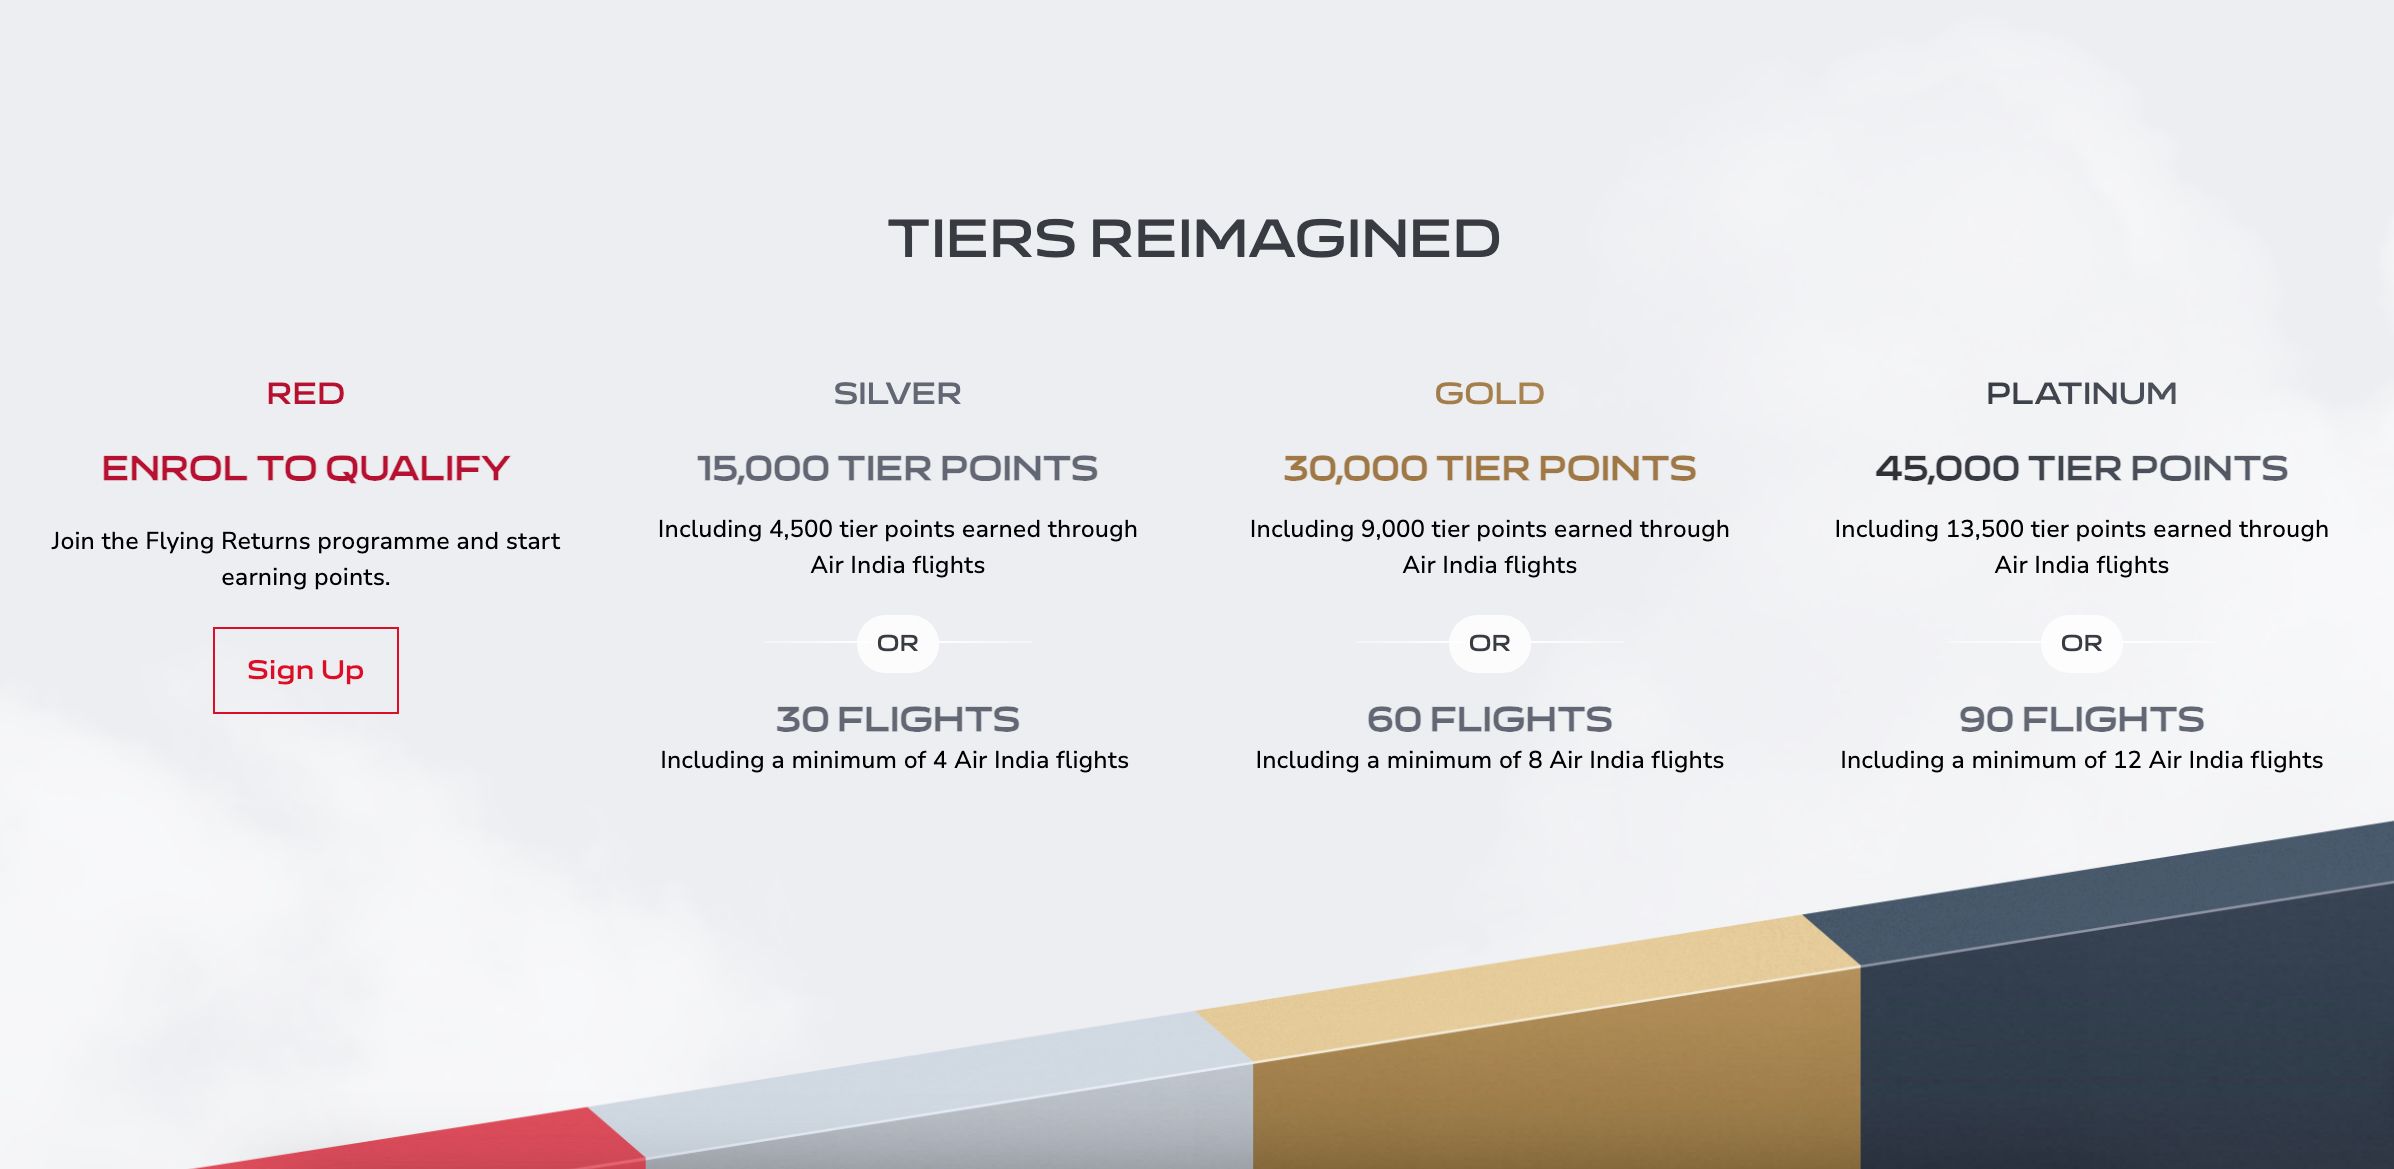 New Air India Tiers